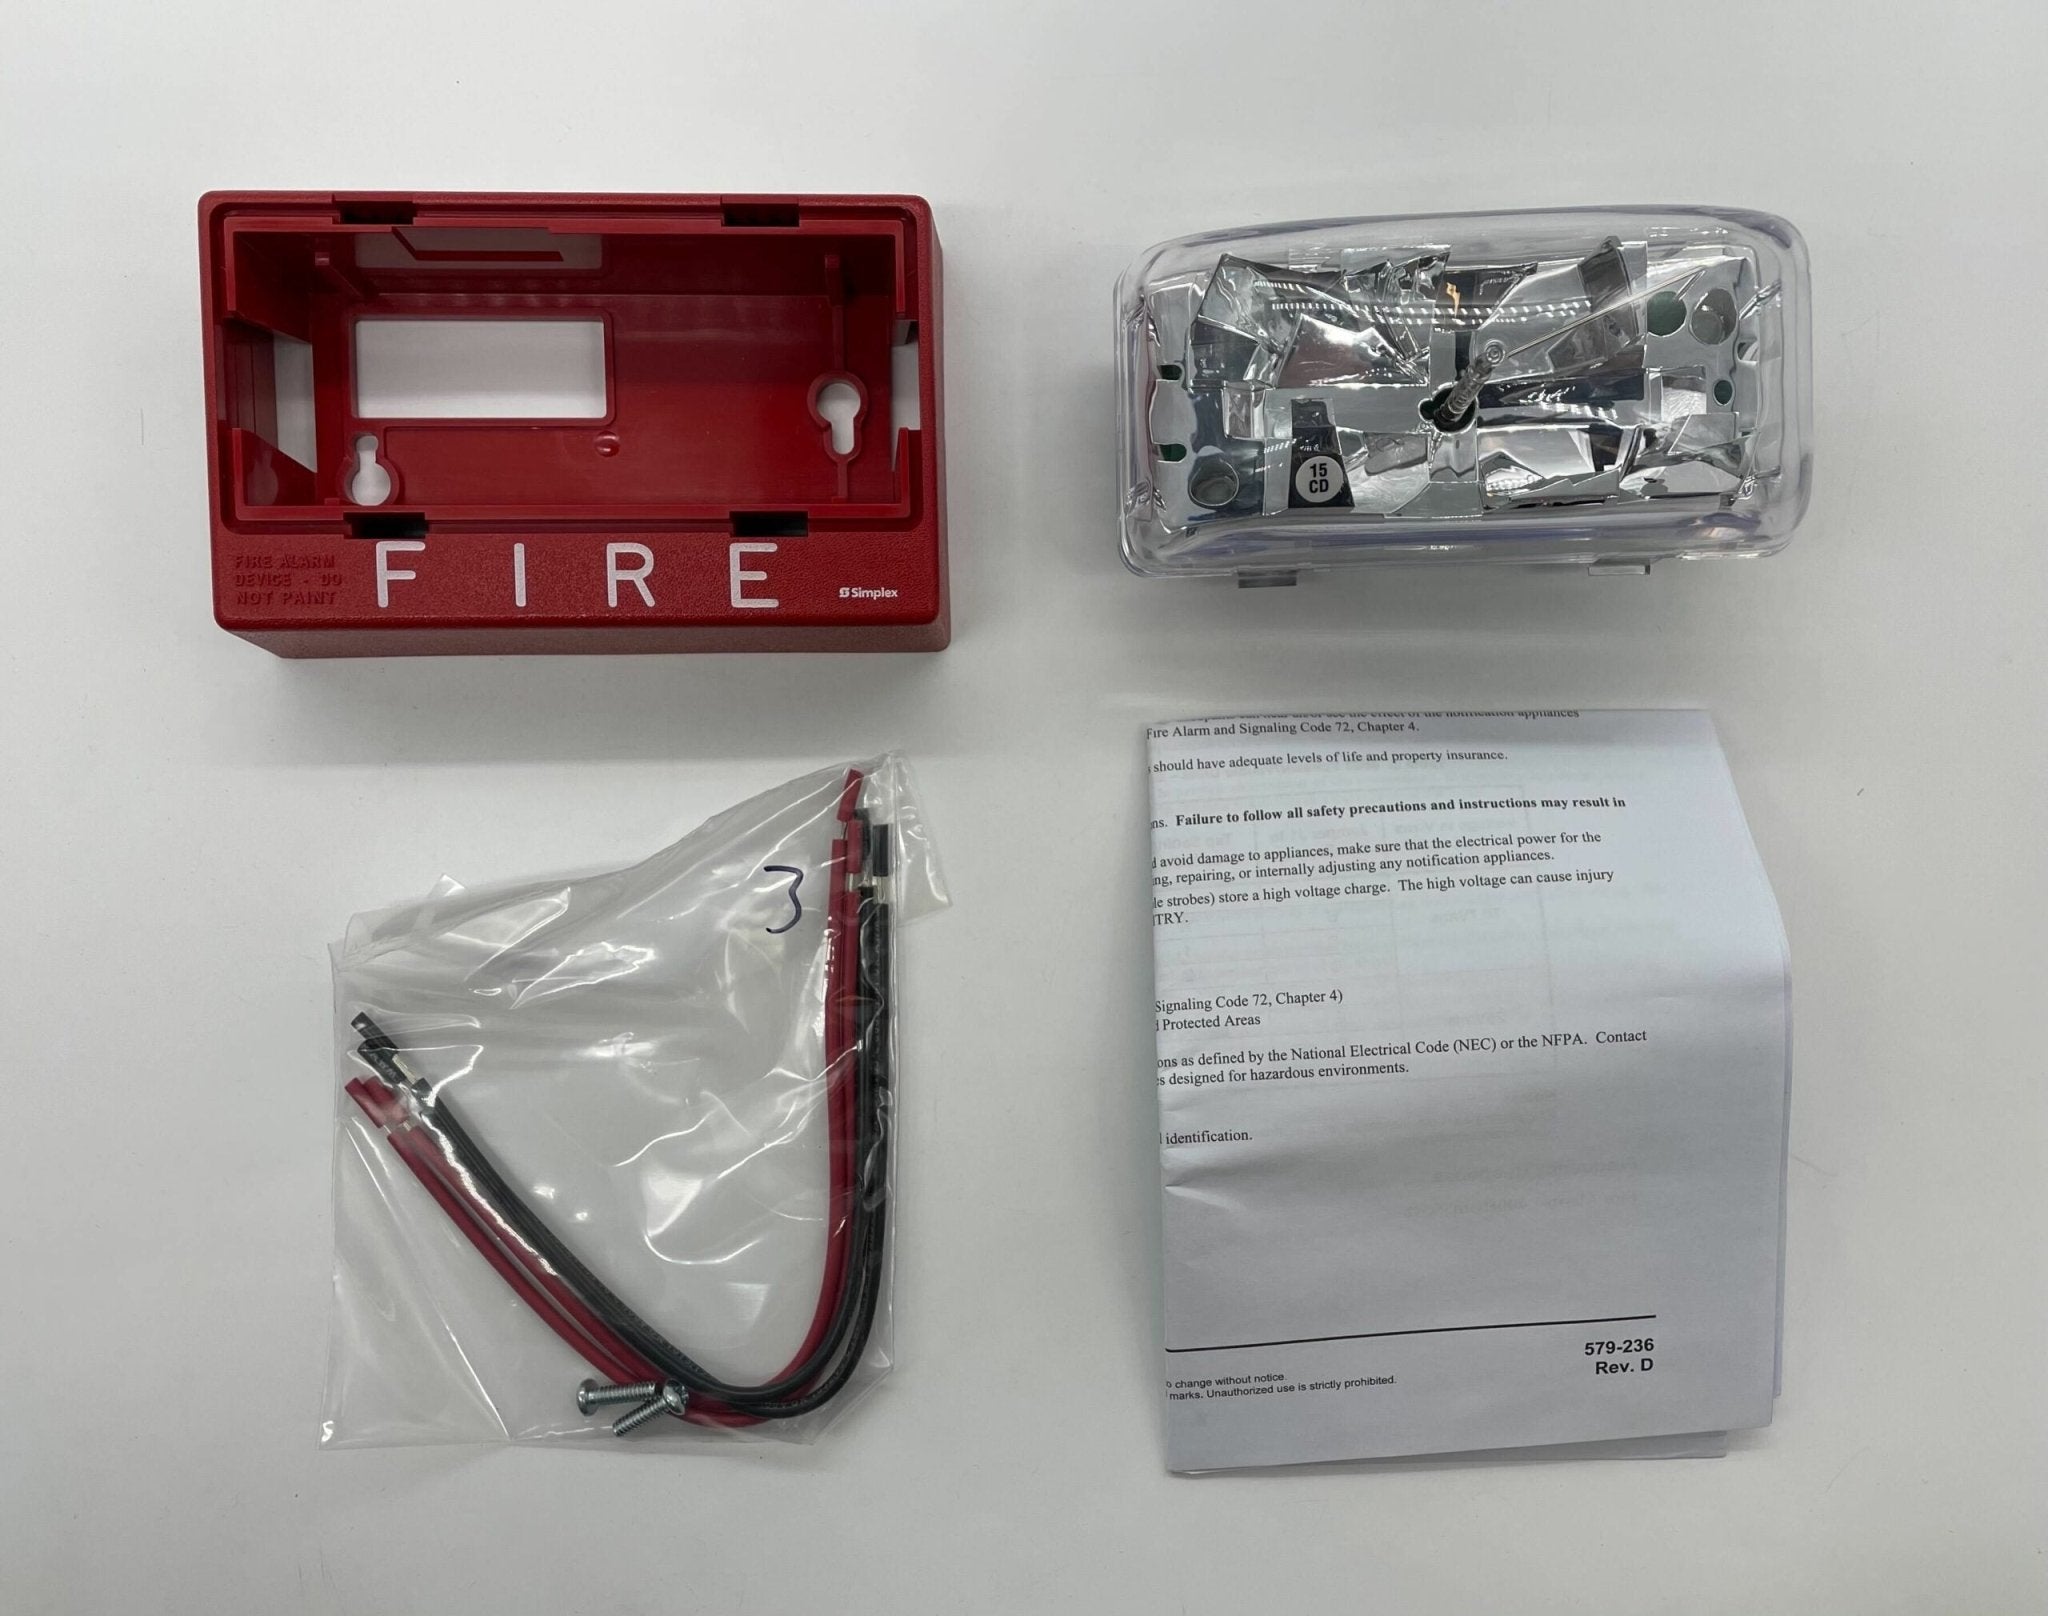 Simplex 4904-9178 Red Wall Mount Strobe - The Fire Alarm Supplier